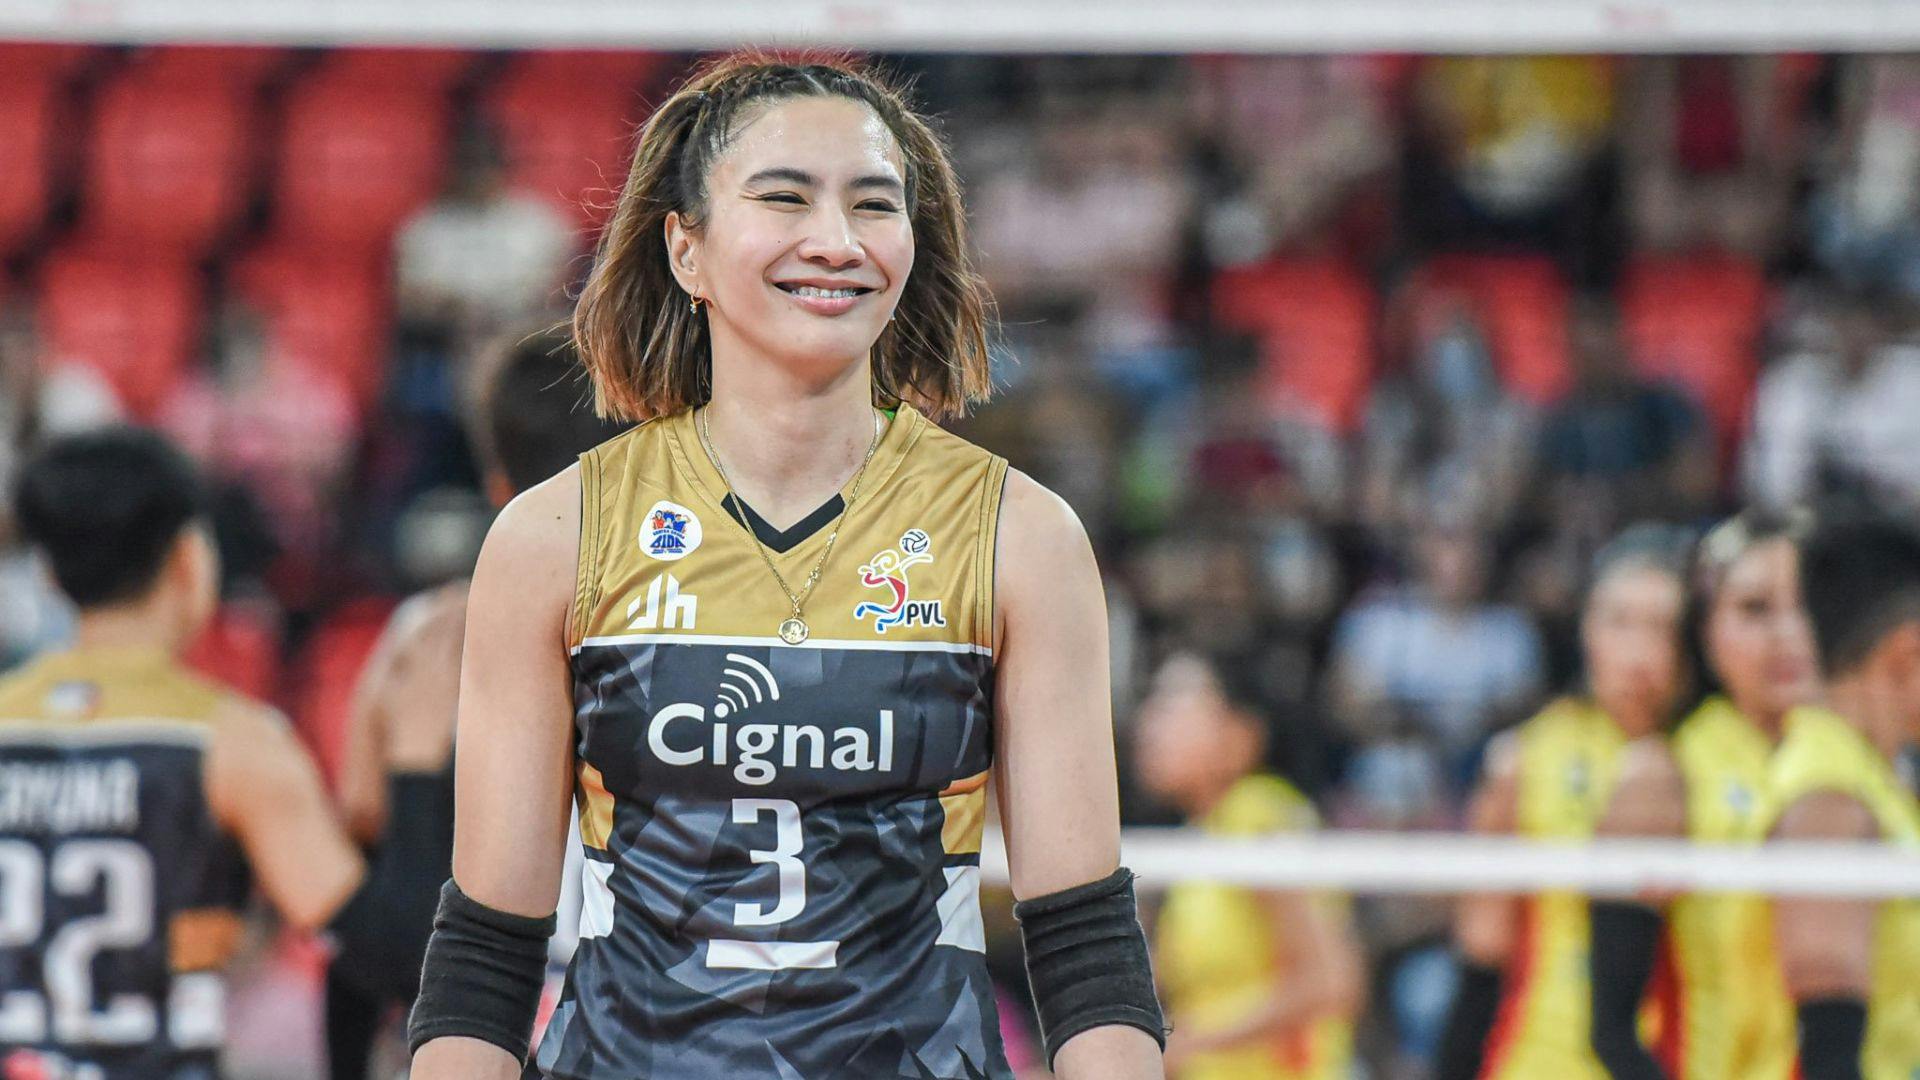 Rachel Anne Daquis has very relatable reaction after renewing driver